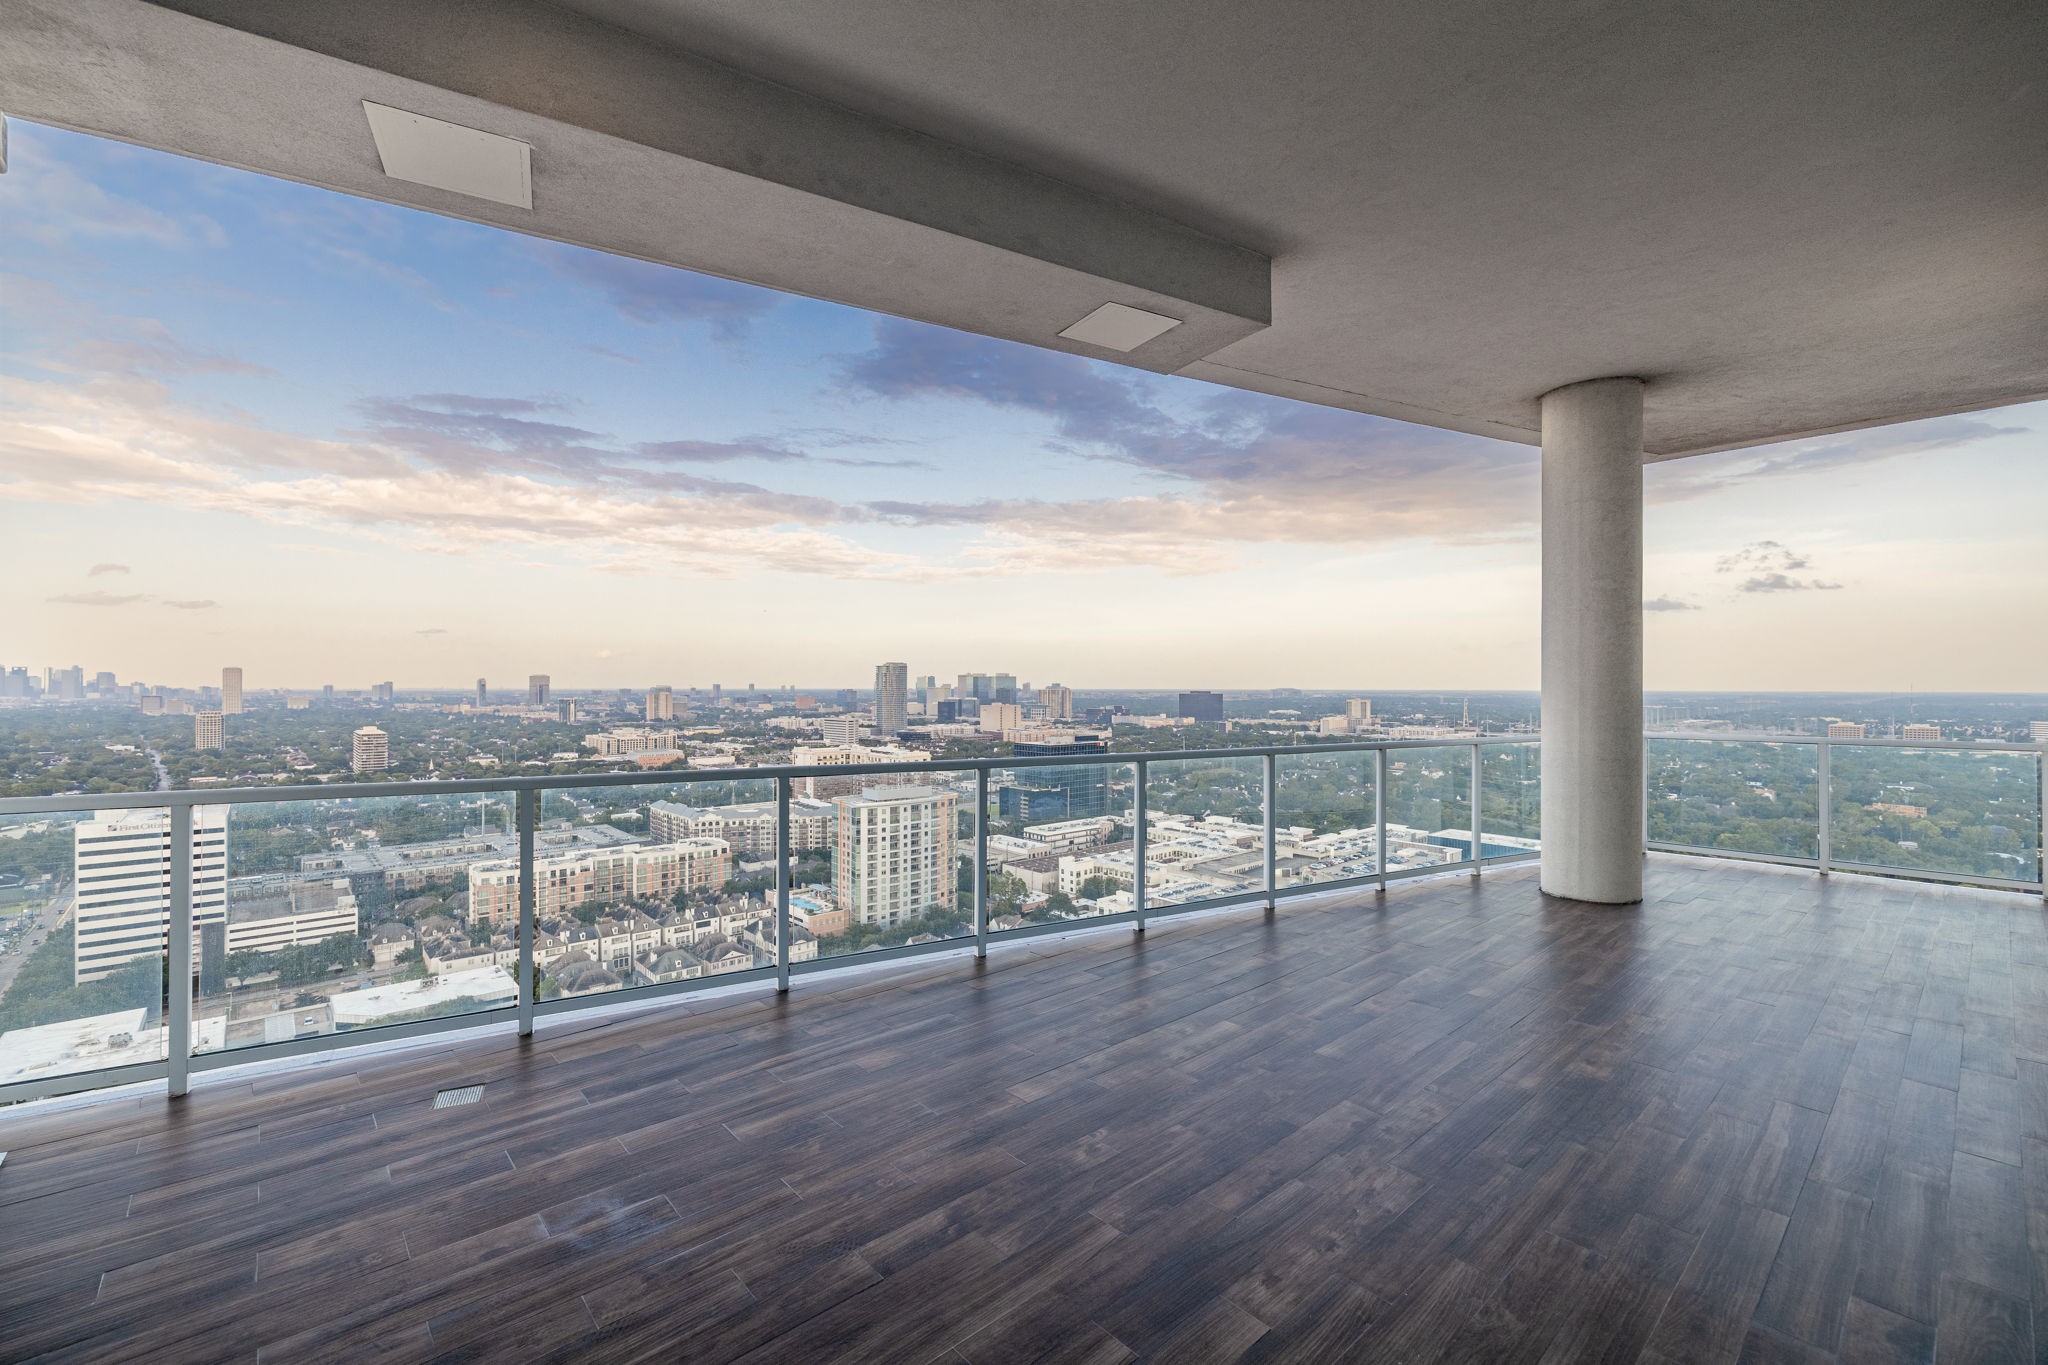 Welcome to your outdoor balcony with breathtaking Houston views.